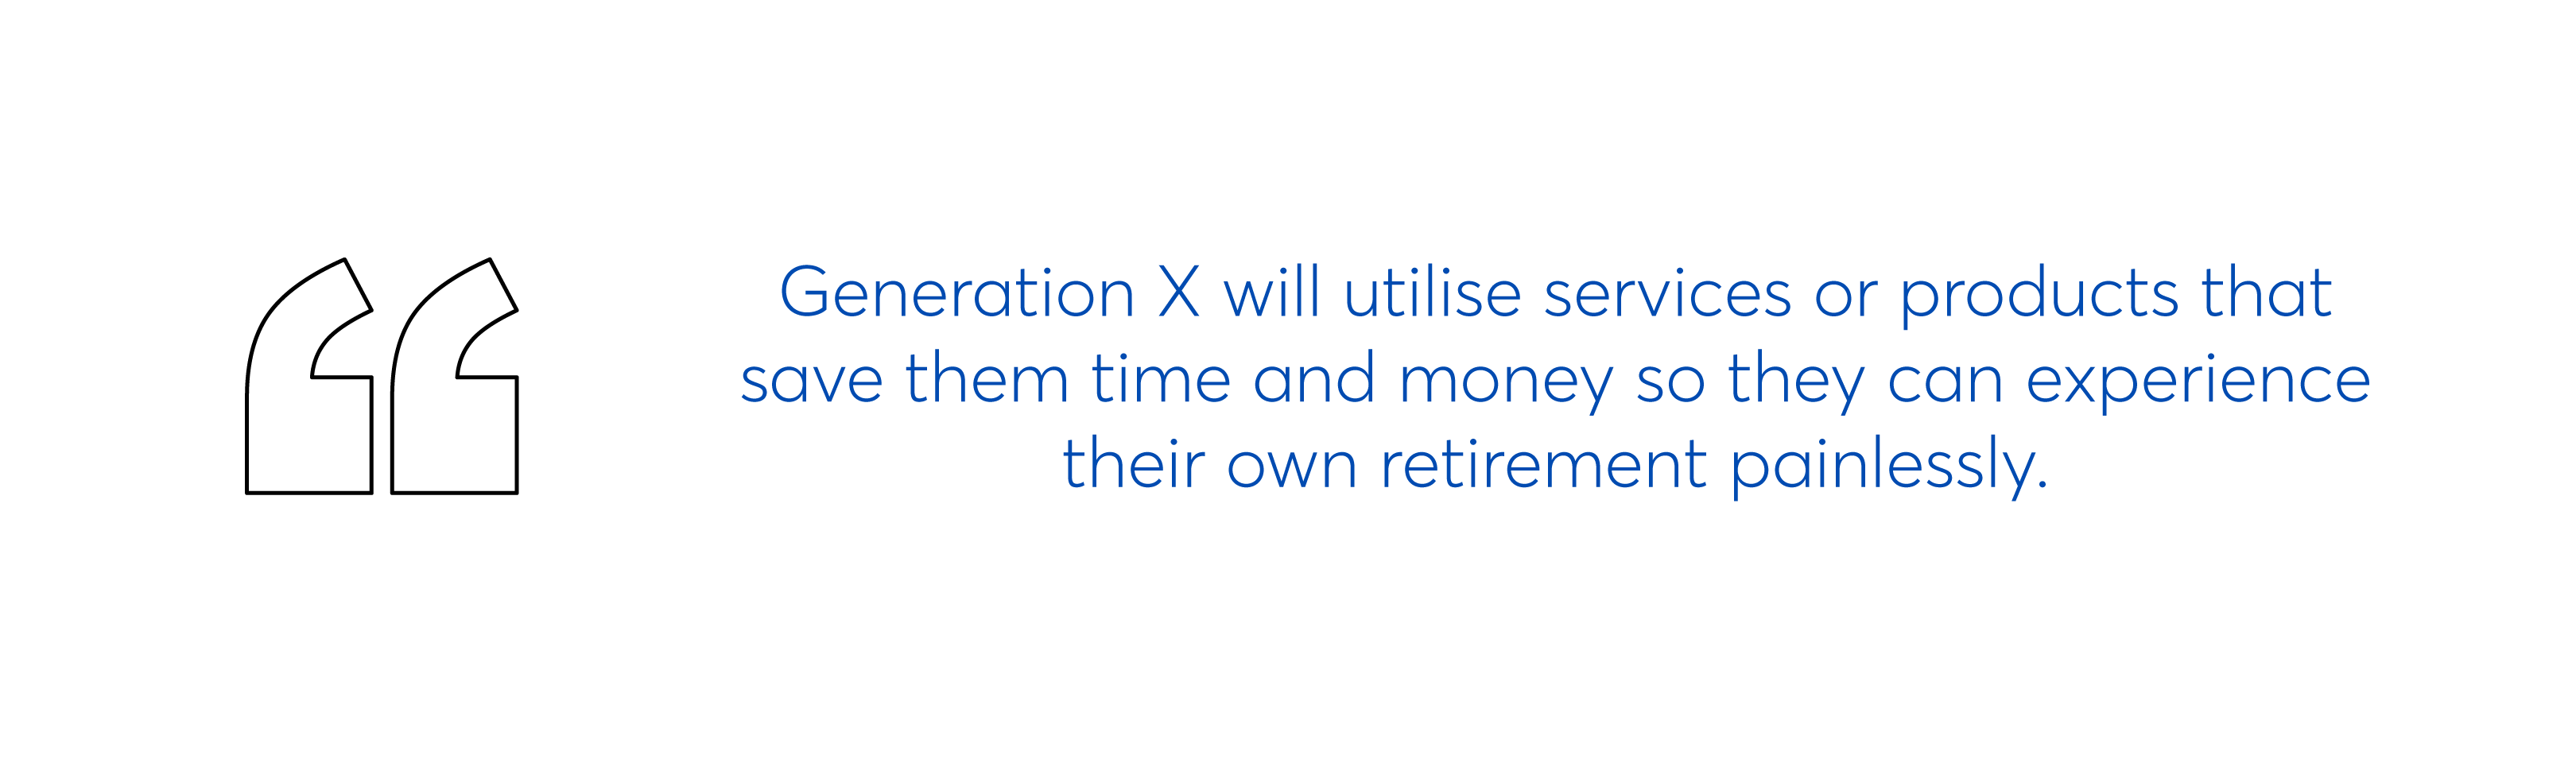 Gen X will use services that save them time and money